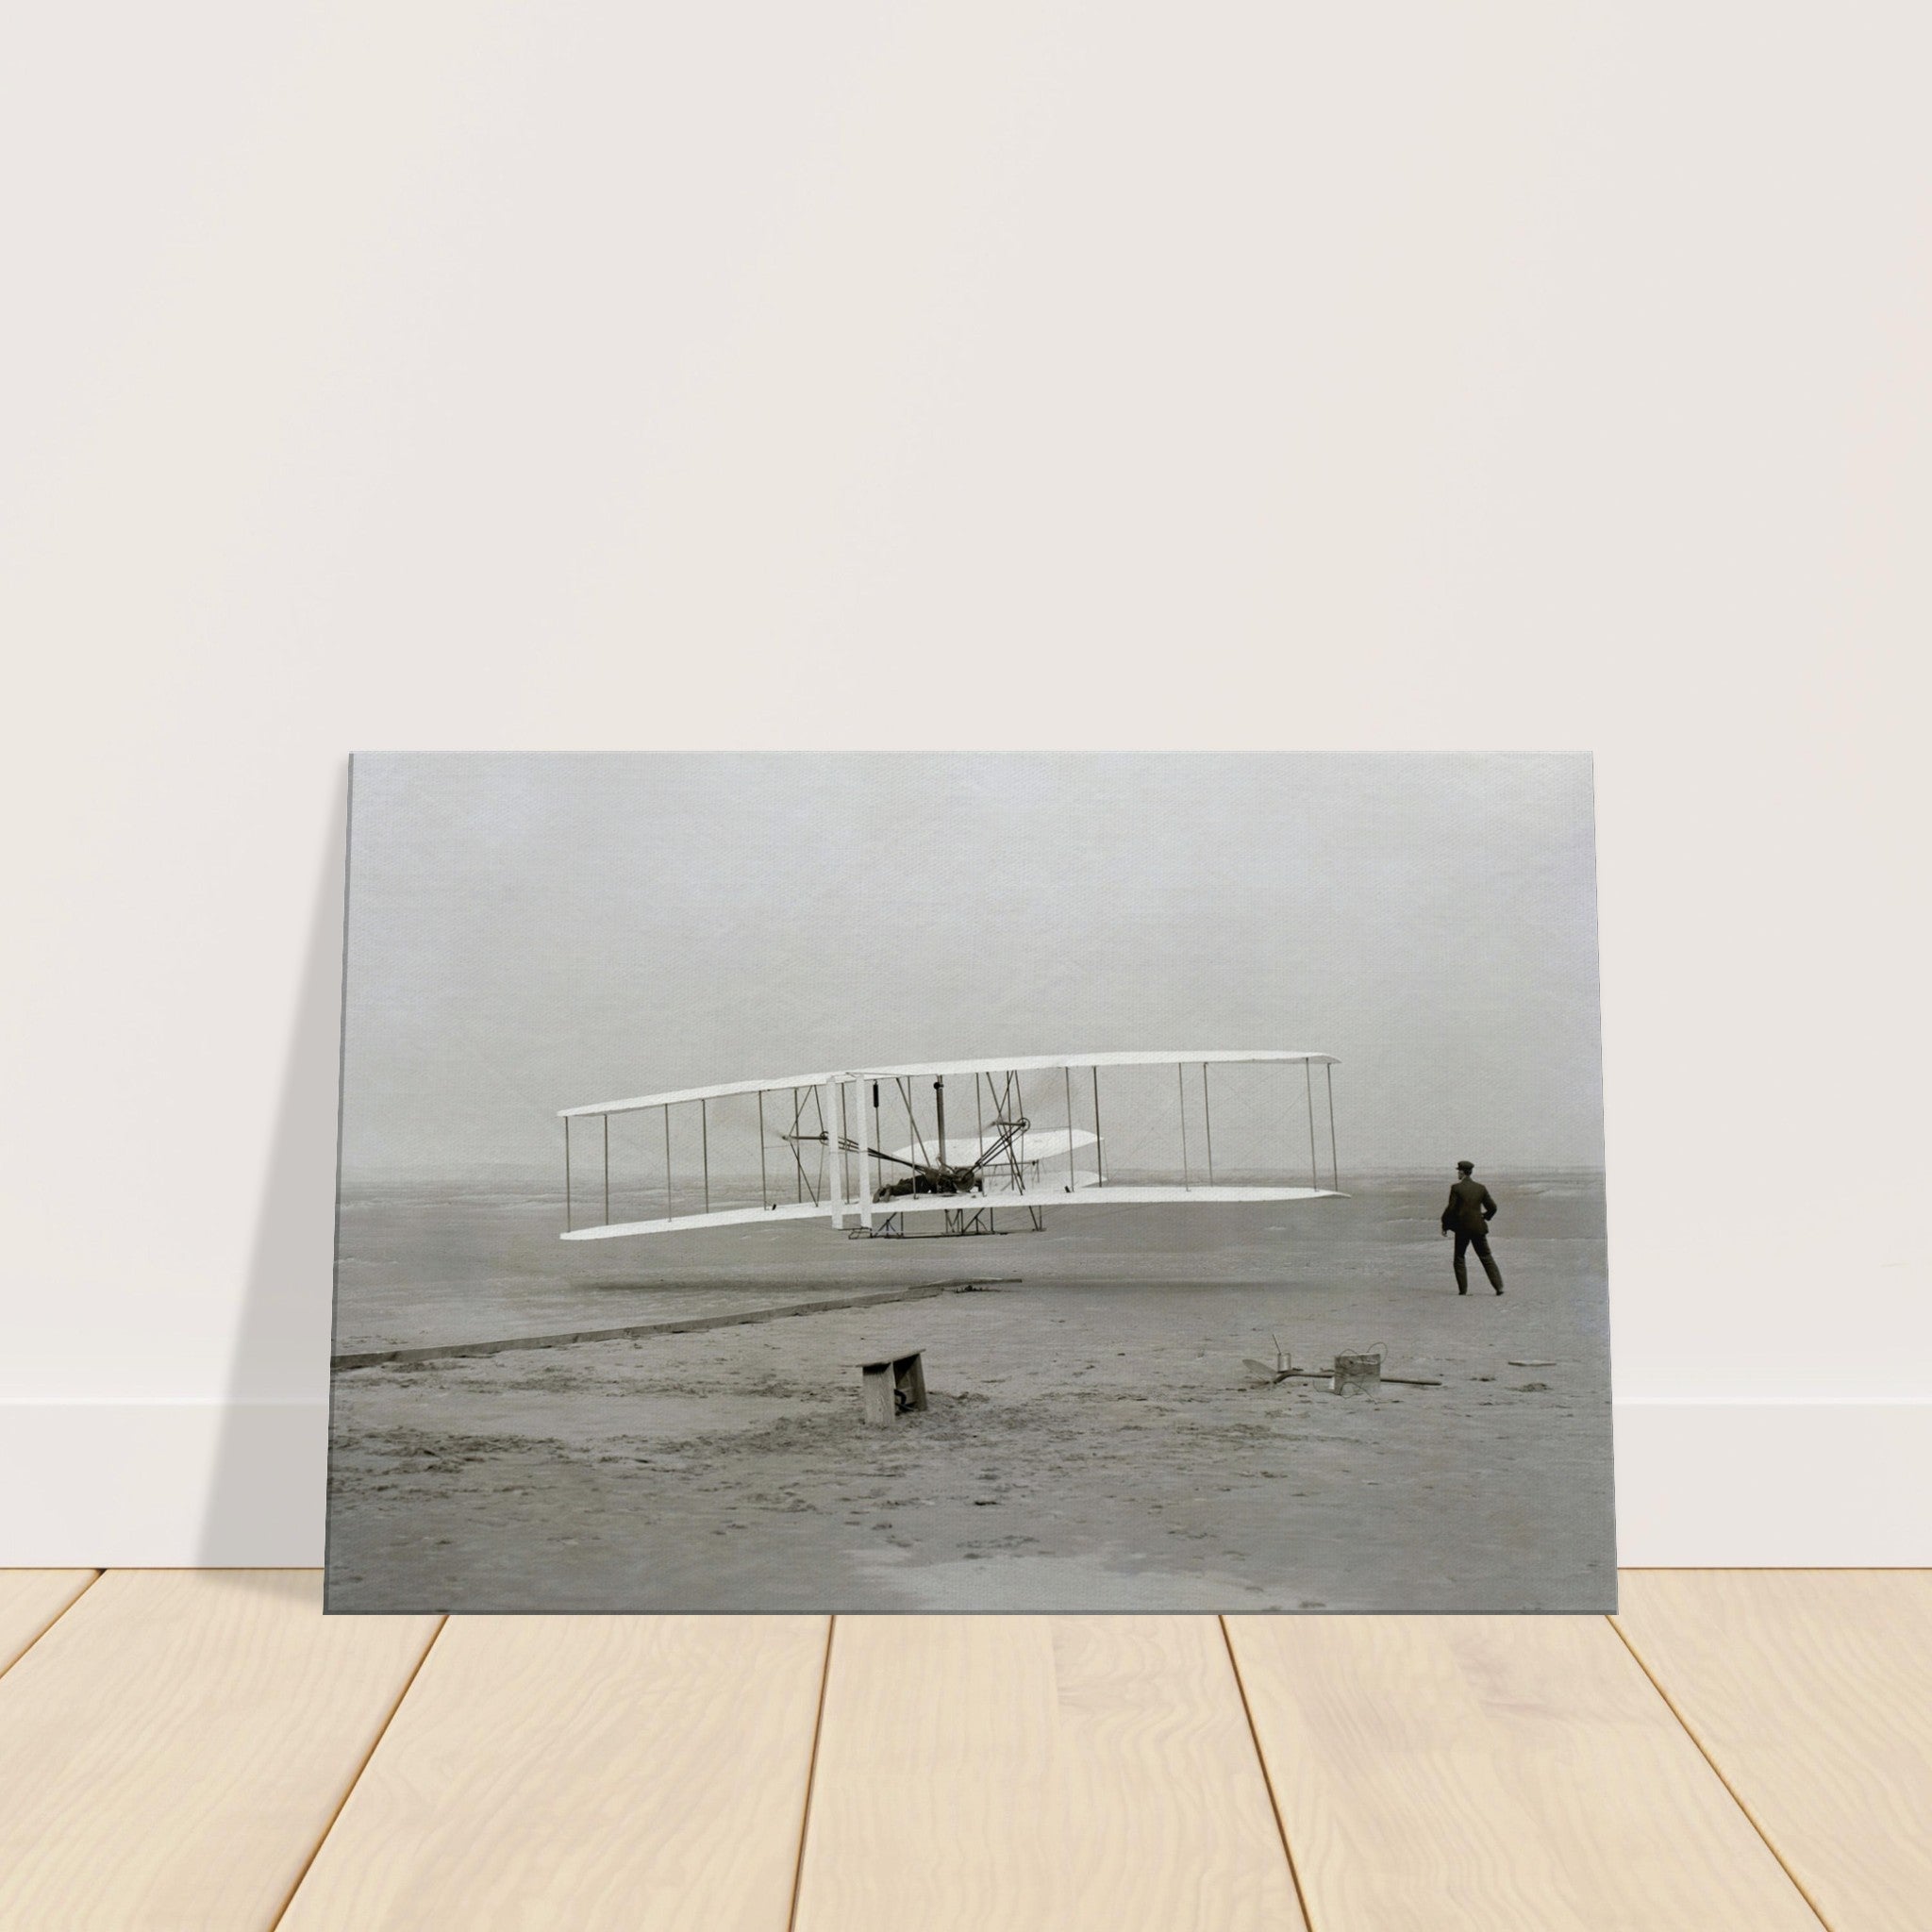 The Wrgith Brothers on Canvas - I Love a Hangar